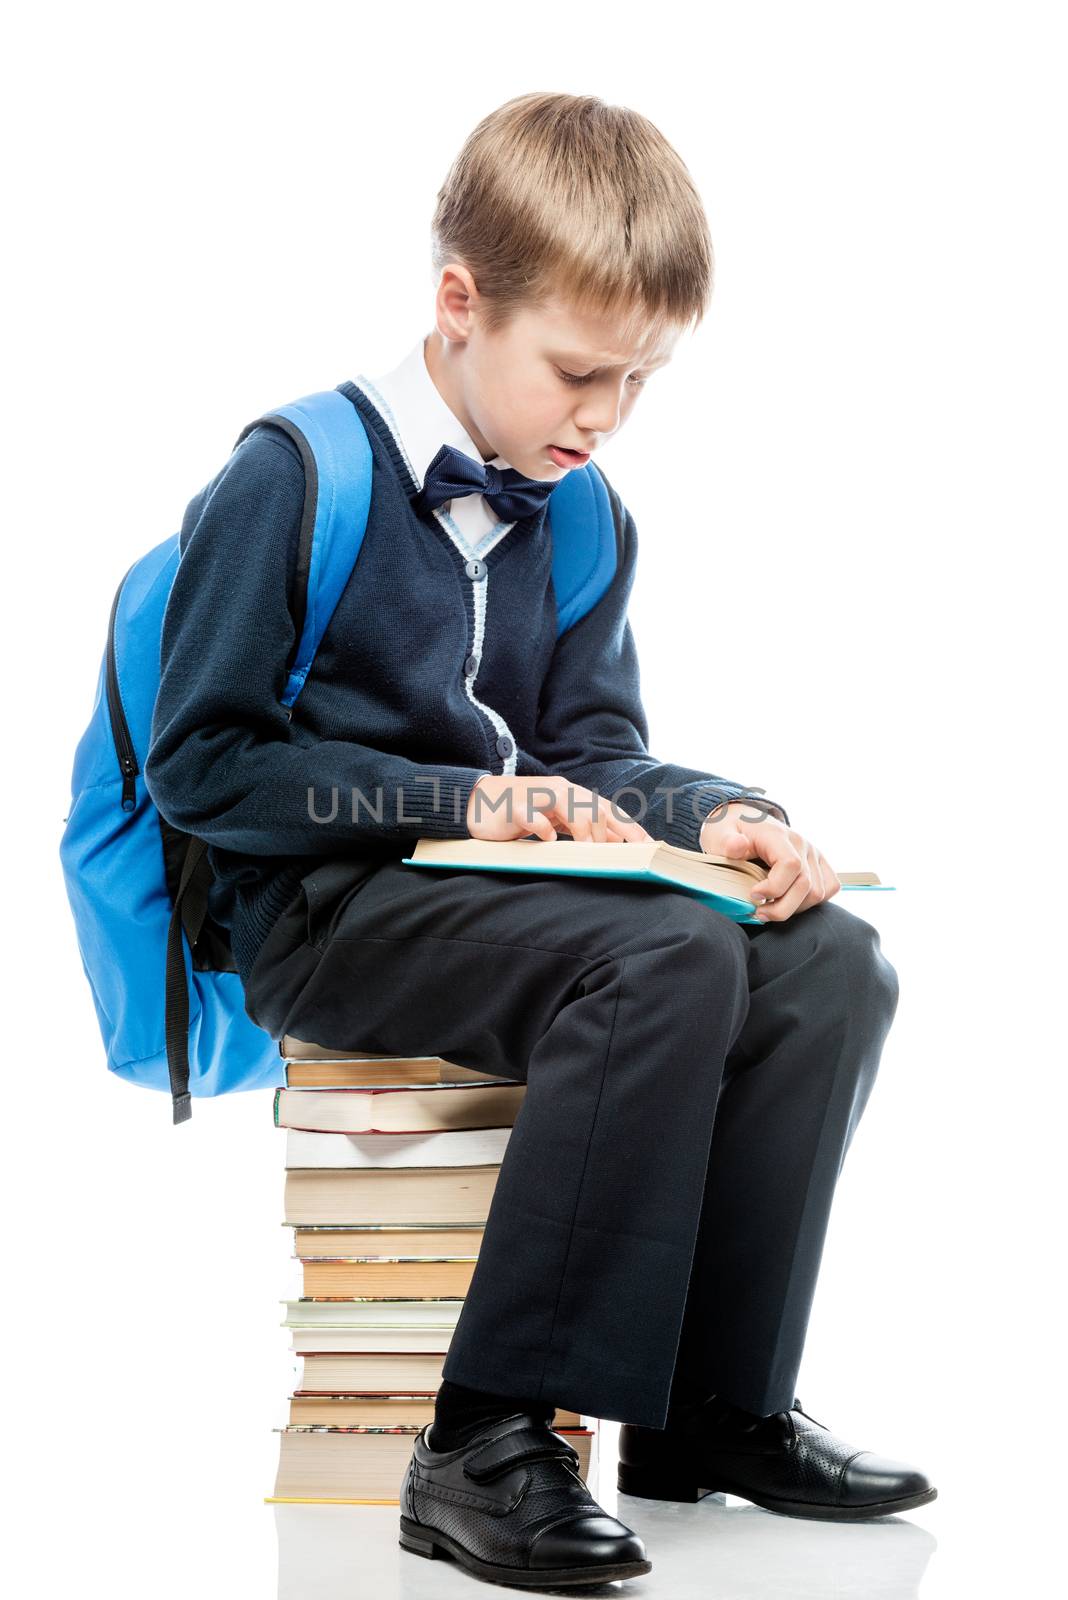 the student is sitting on a pile of books and reads a textbook on a white background